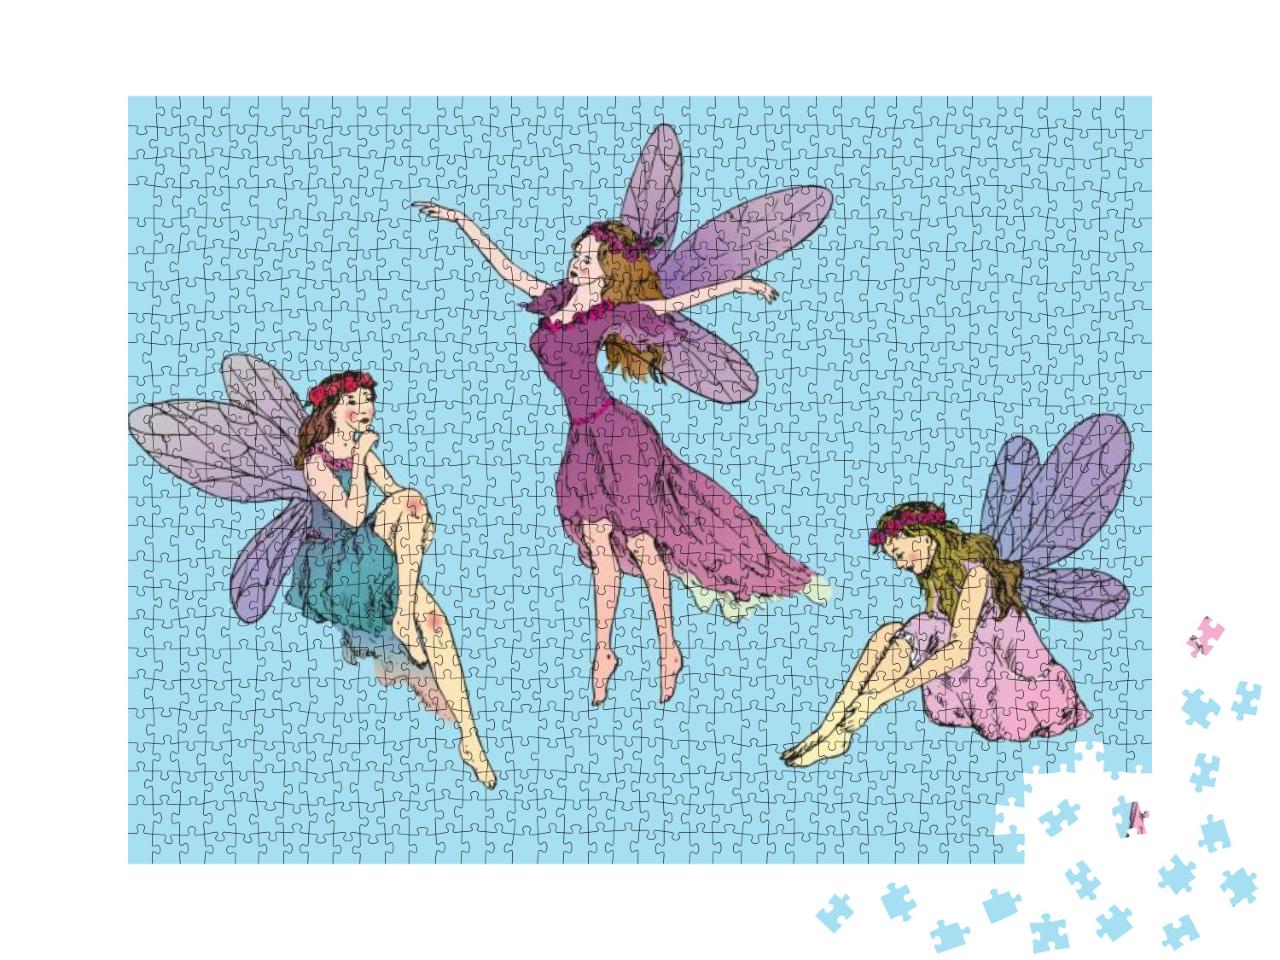 Beautiful Three Young Fairies Dancing, Flying in W... Jigsaw Puzzle with 1000 pieces